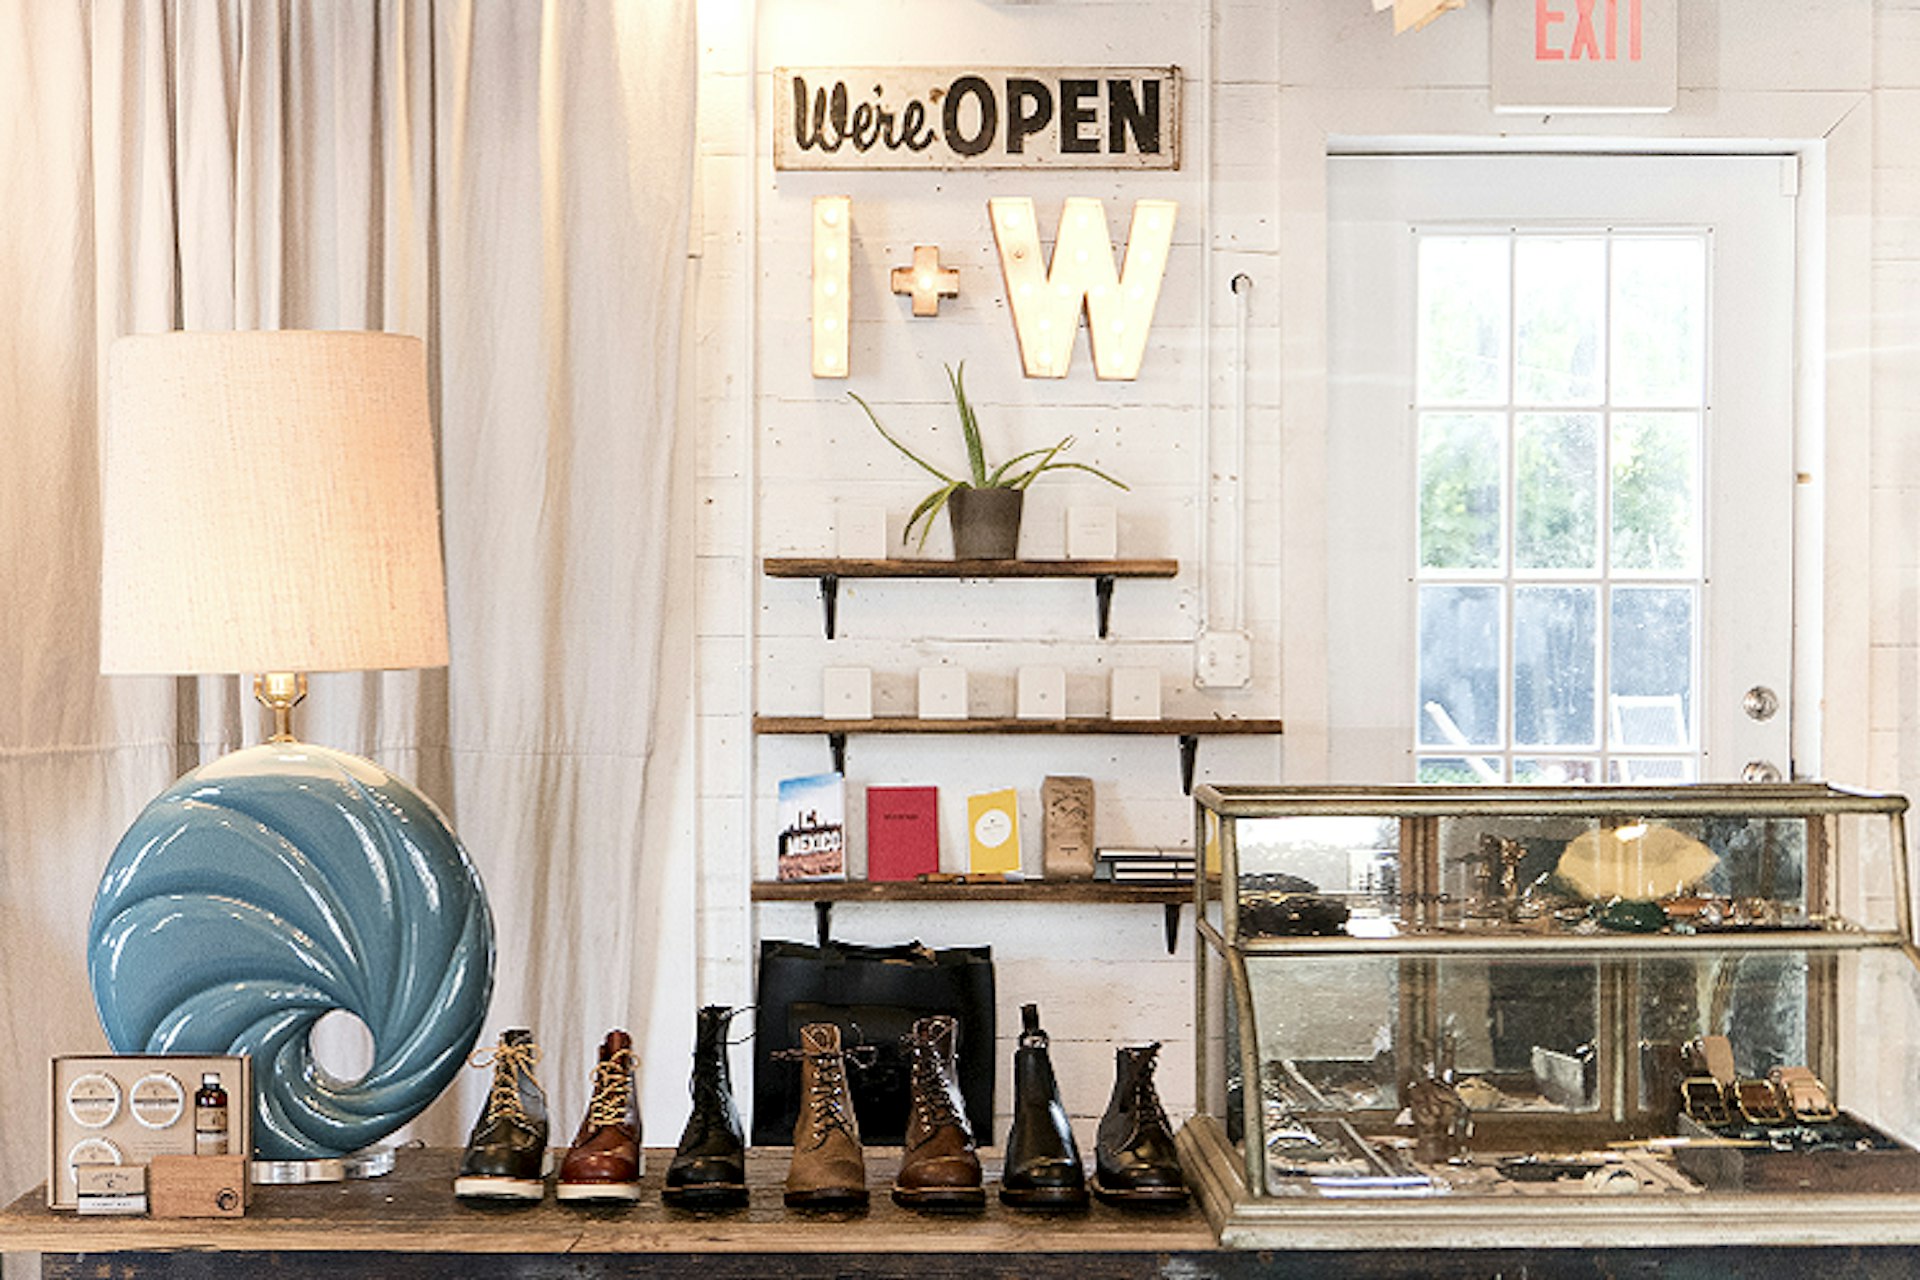 Pick up a little Nashville something at Imogene + Wille. Image by Dora Whitaker / Lonely Planet